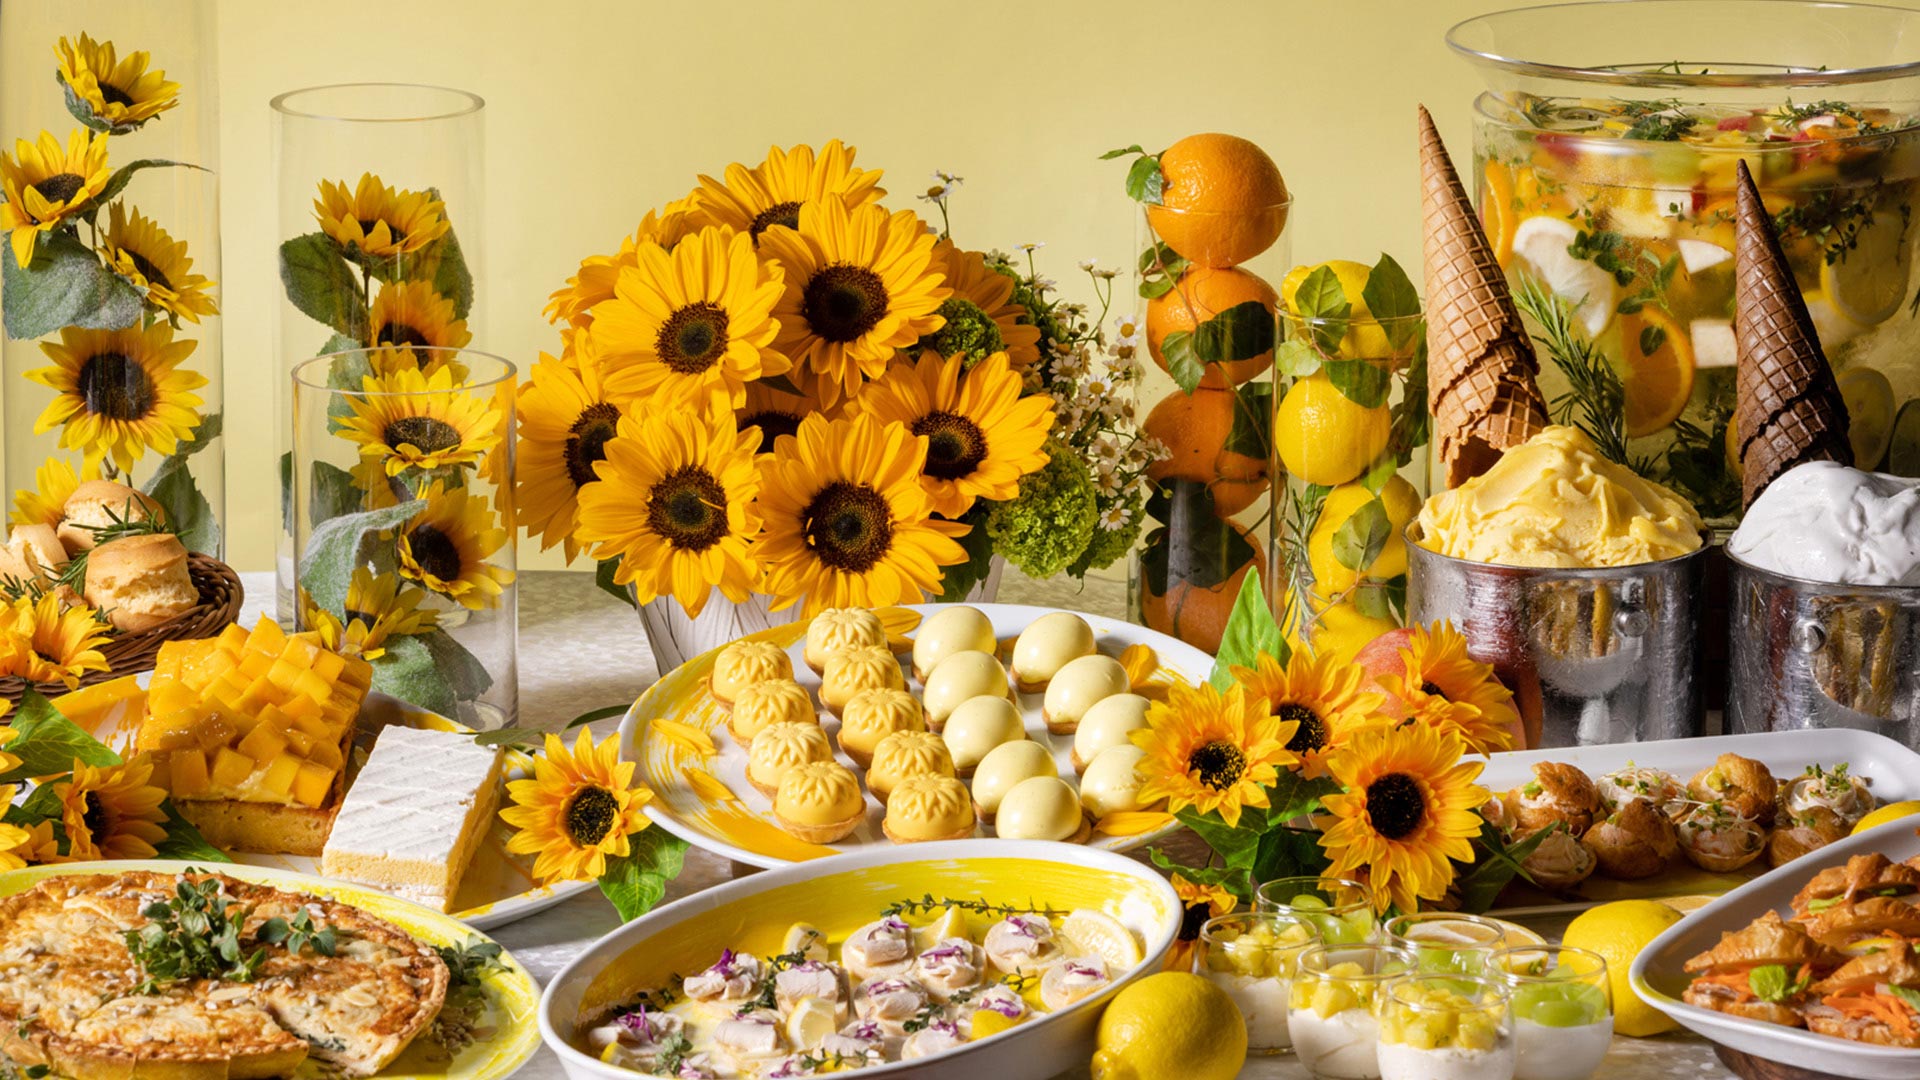 Sunflower Afternoon Tea inspired by Europe’s midsummer picnics